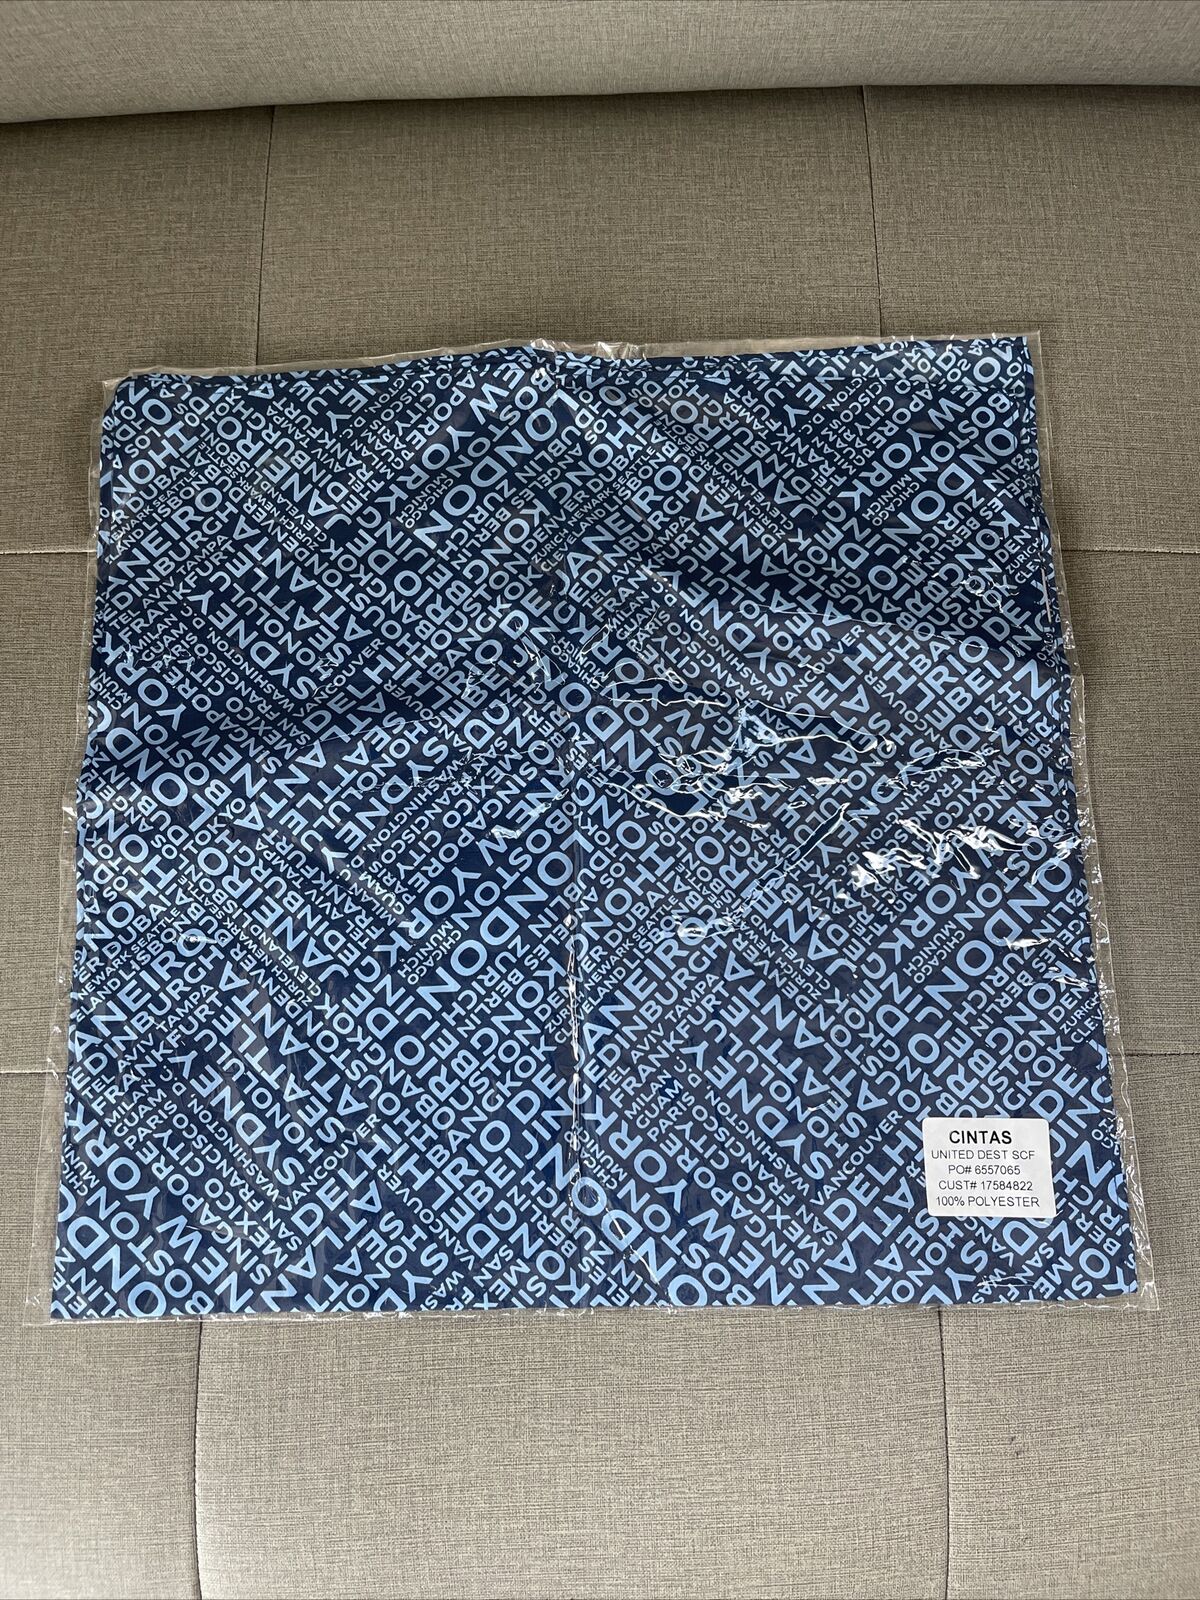 United Airlines Flight Attendant Scarf New